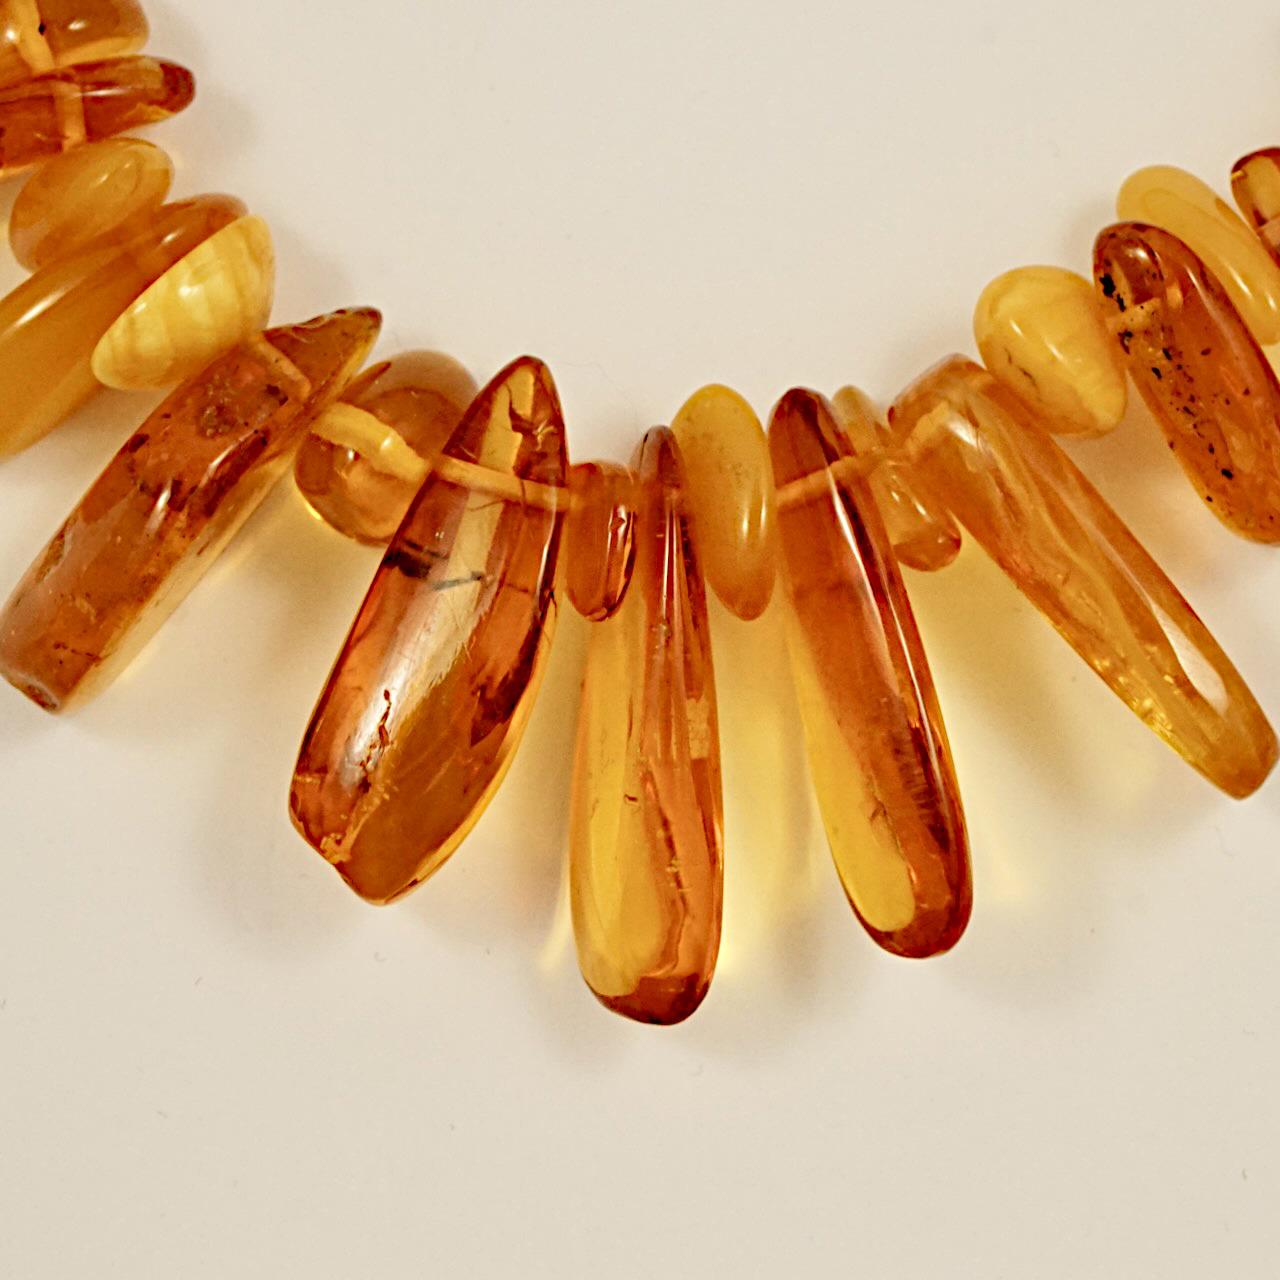 Wonderful long amber graduated bead drop necklace with beautiful polished amber beads. The necklace length is 65.5 cm / 25.78 inches, and the longest drop is 3.5 cm / 1.37 inches. It is in very good condition. 

This beautiful amber bead necklace is